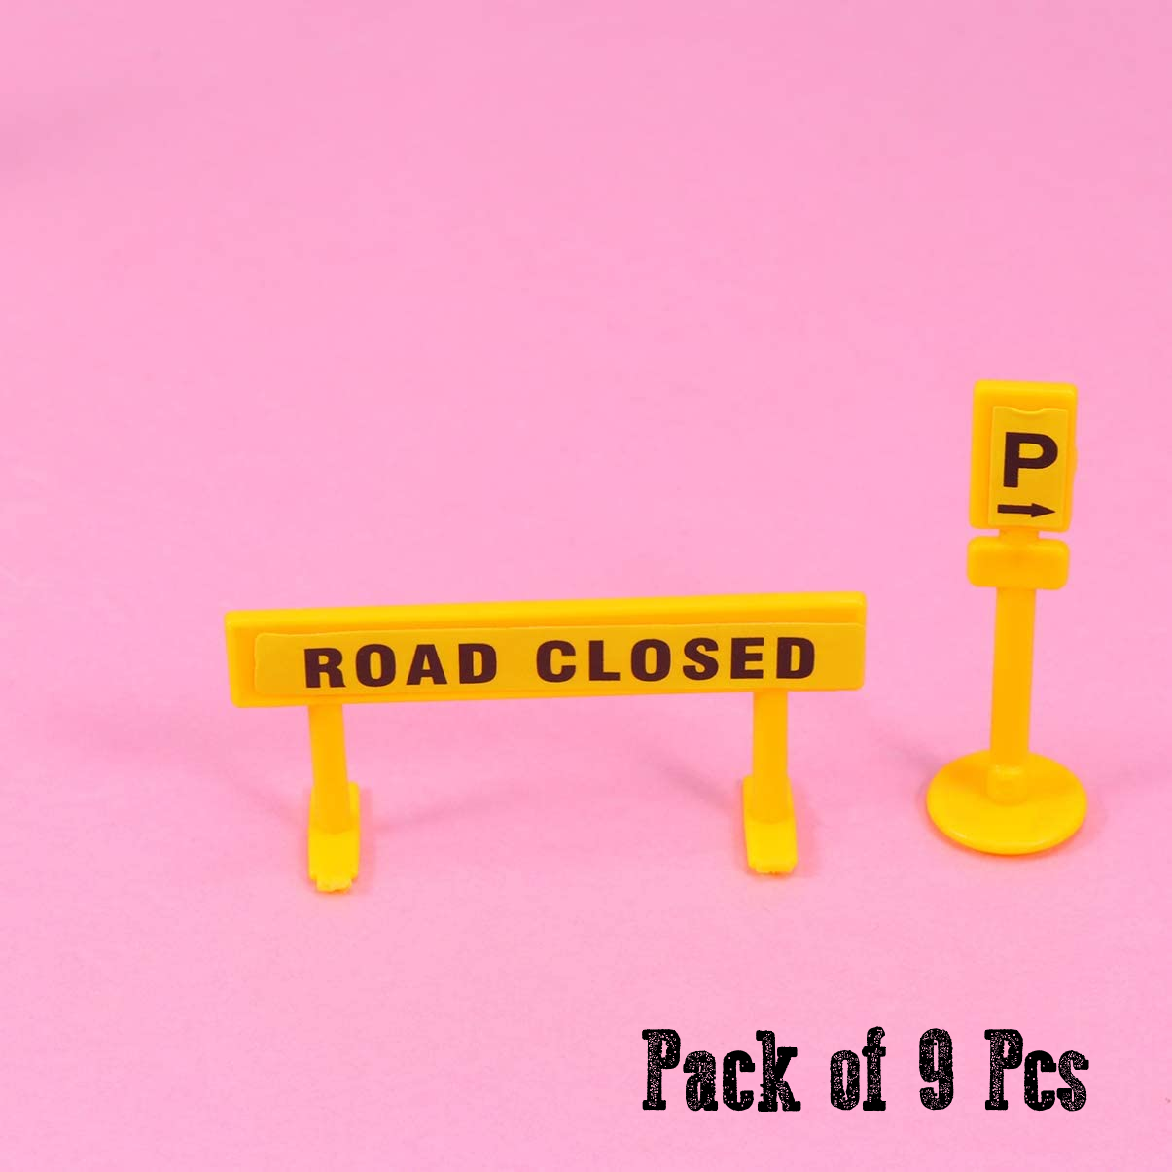 Cake Decoration, Cupcake Topper -Construction Road Signs/ barricades - set of 9pcs - Rampant Coffee Company